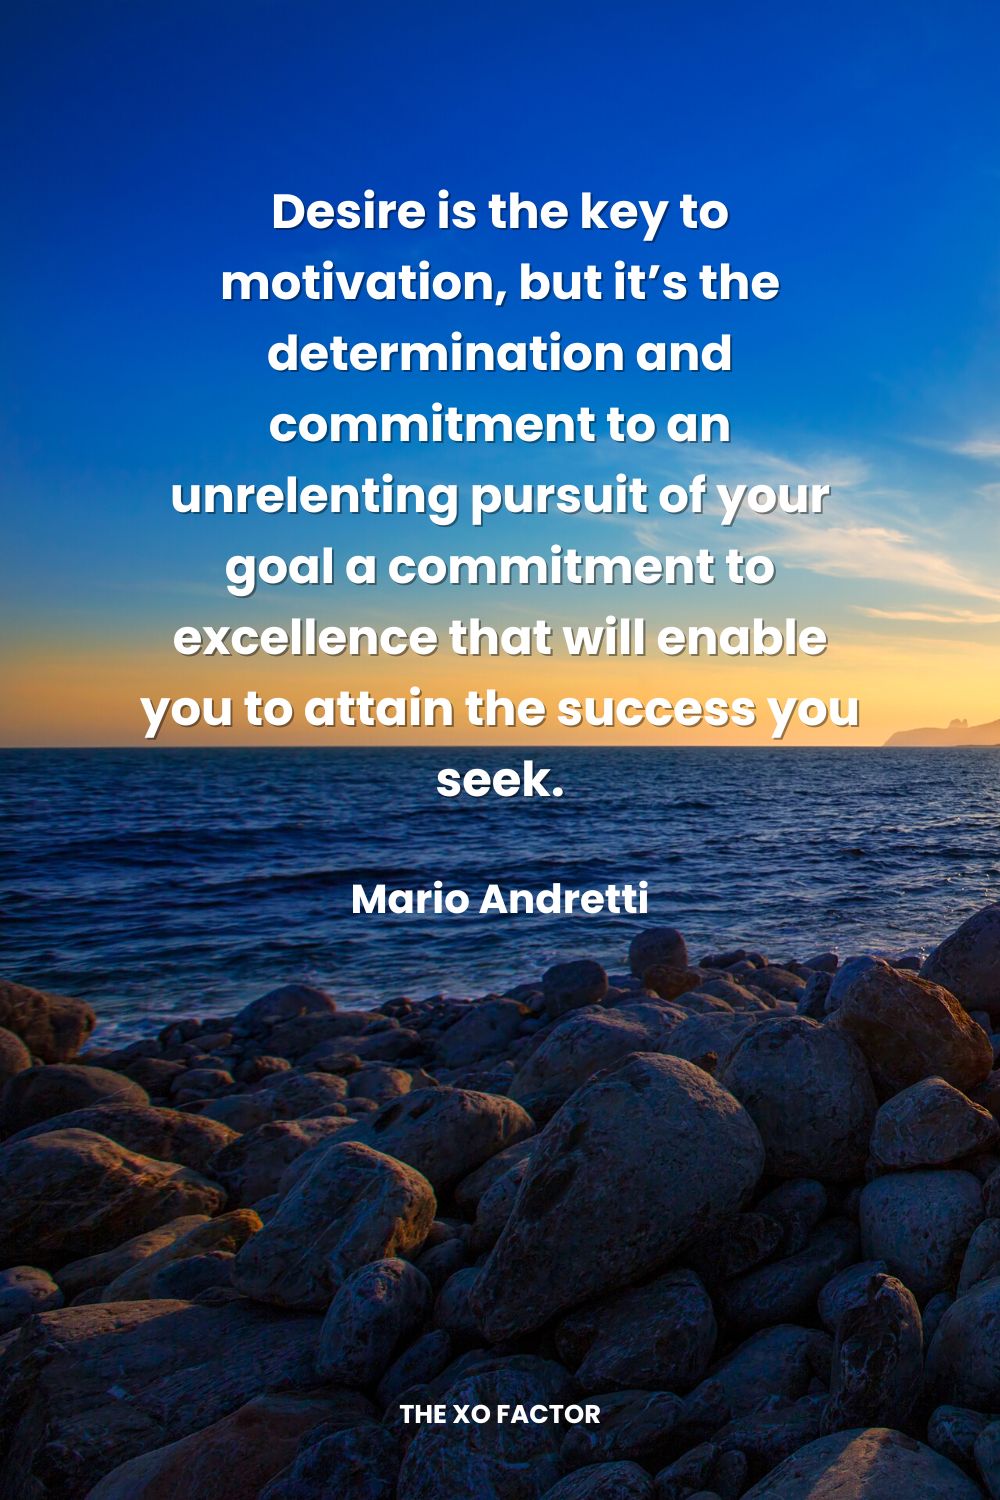 Desire is the key to motivation, but it’s the determination and commitment to an unrelenting pursuit of your goal a commitment to excellence that will enable you to attain the success you seek. Mario Andretti